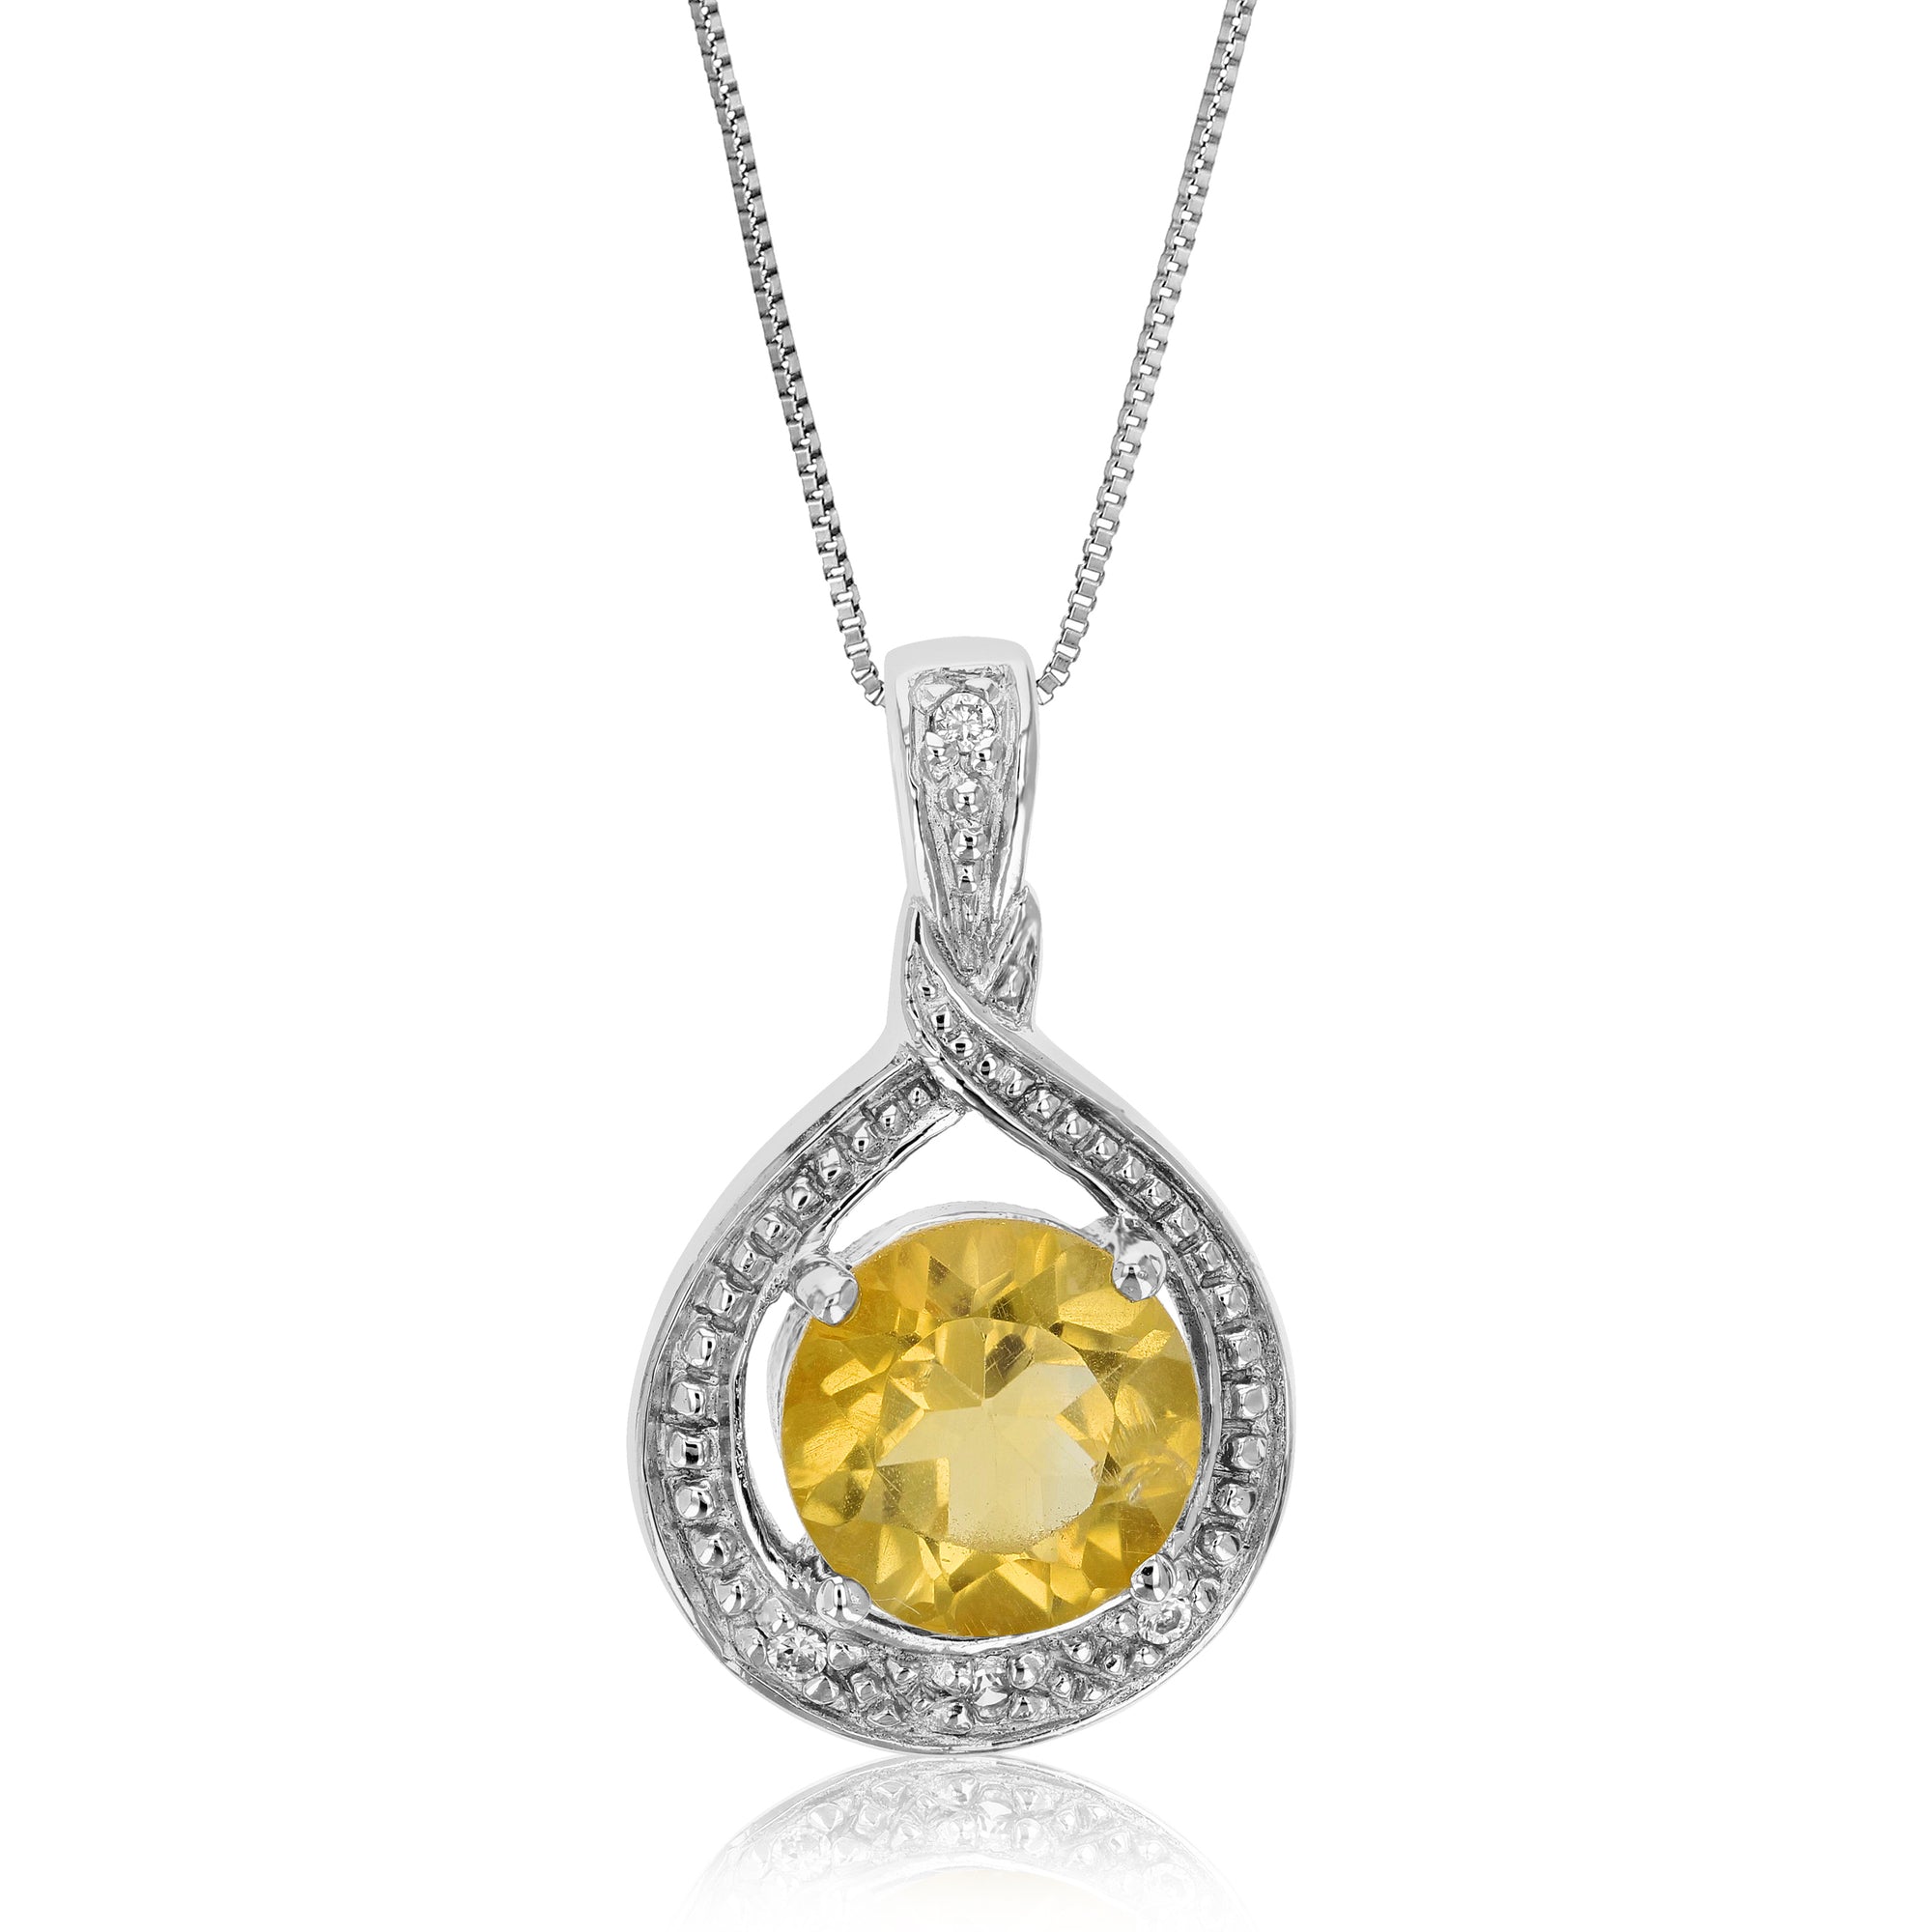 1.30 cttw Pendant Necklace, Citrine Pendant Necklace for Women in .925 Sterling Silver with Rhodium, 18 Inch Chain, Prong Setting